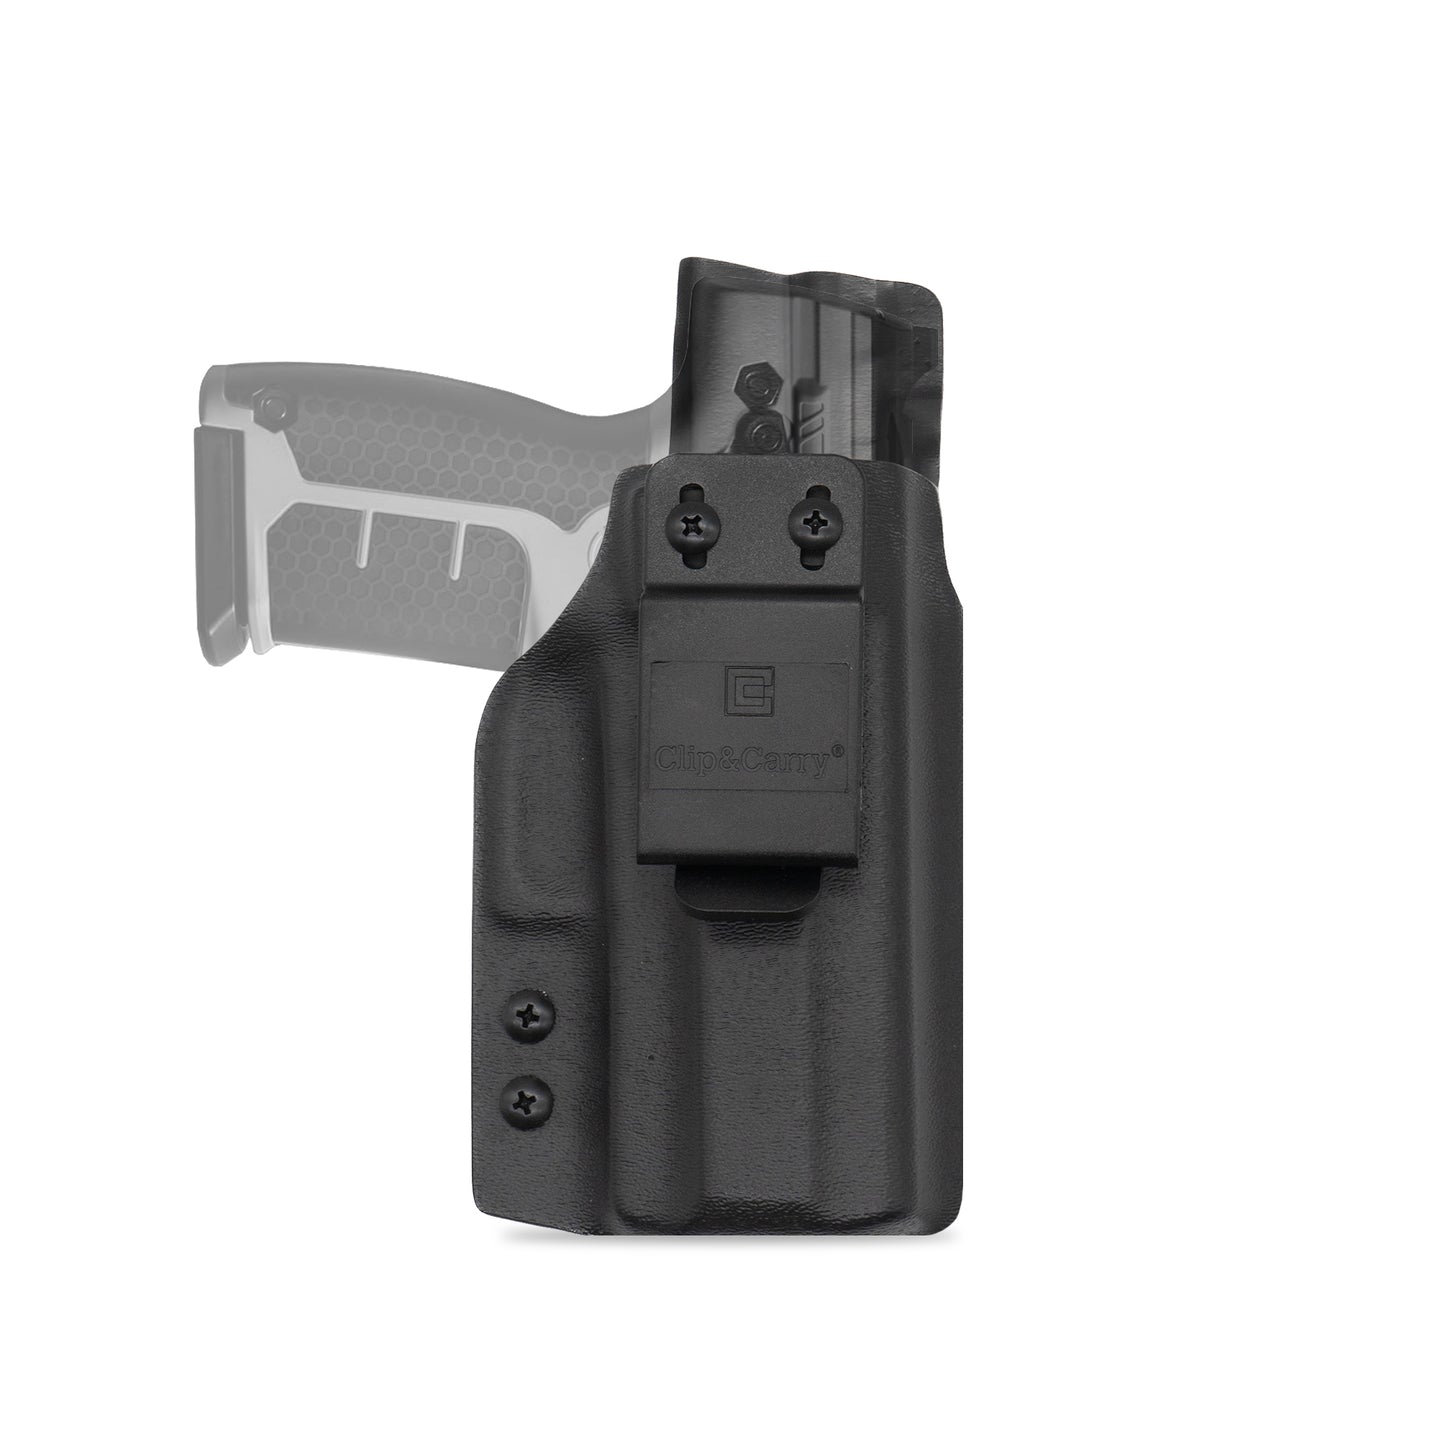 IWB Holster for the Byrna SD/EP